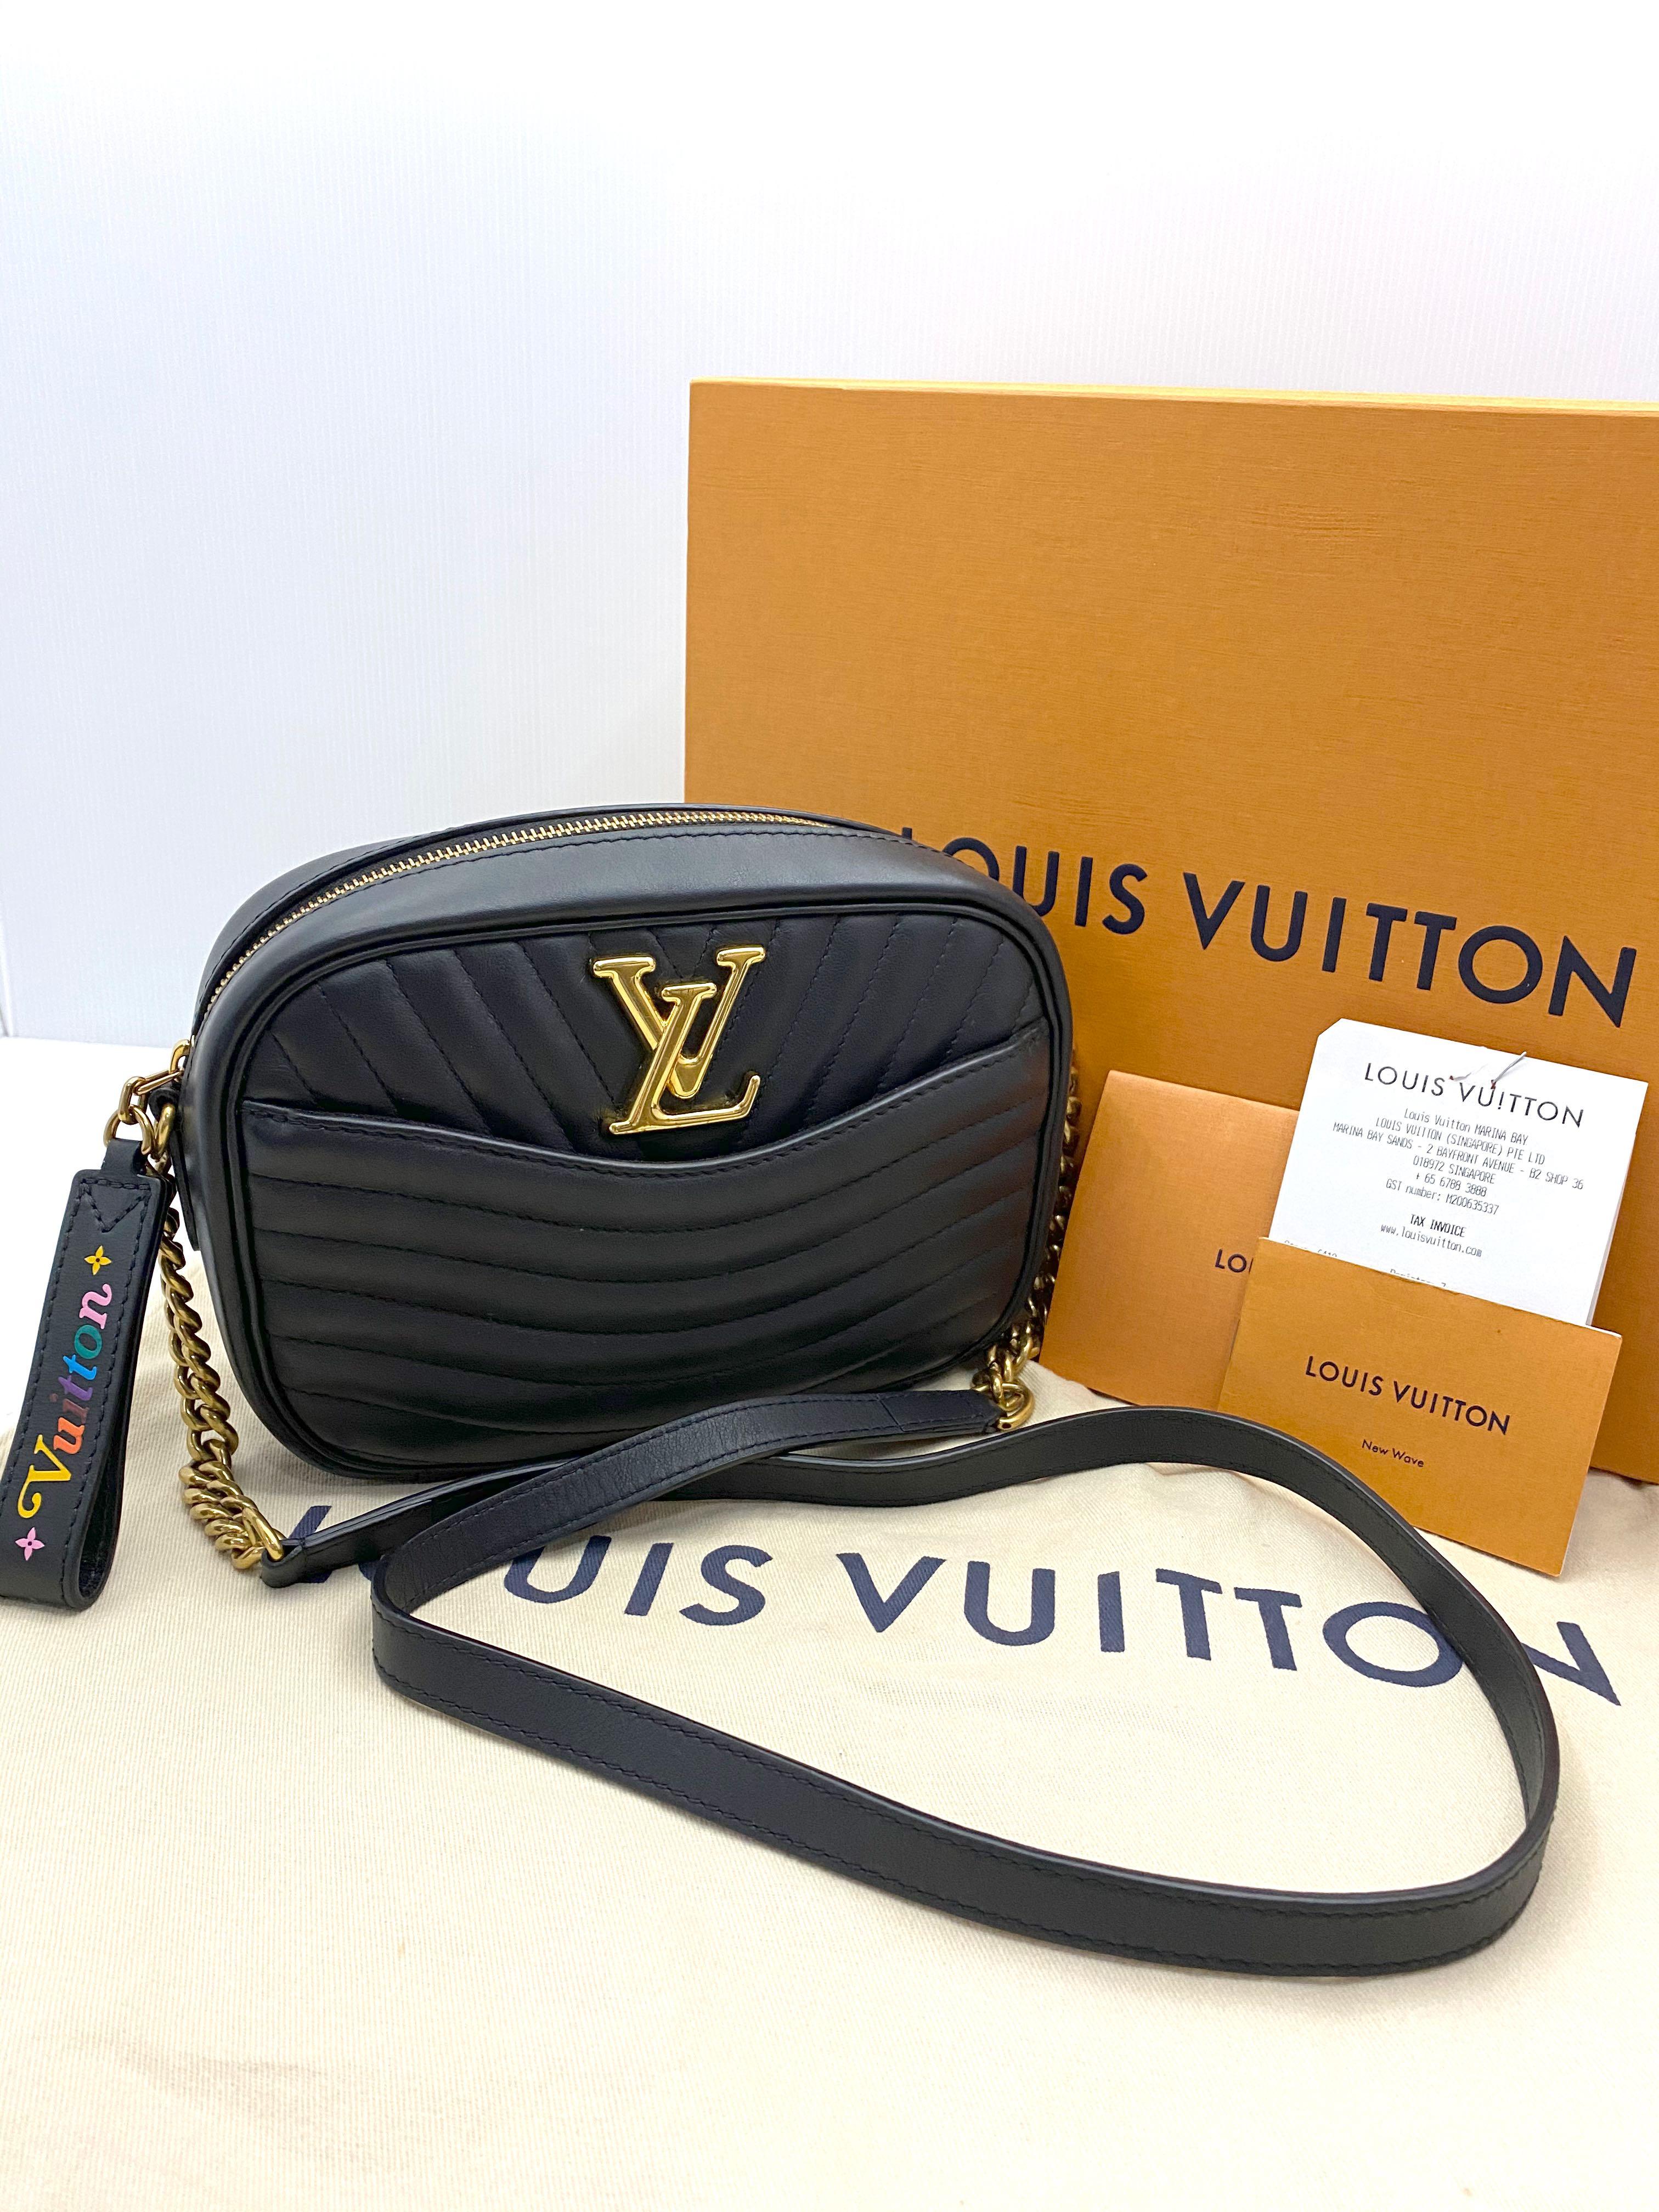 Louis Vuitton Camera Bag - 8 For Sale on 1stDibs  louis vuitton vintage camera  bag, lv vintage camera bag, louis vuitton monogram camera bag